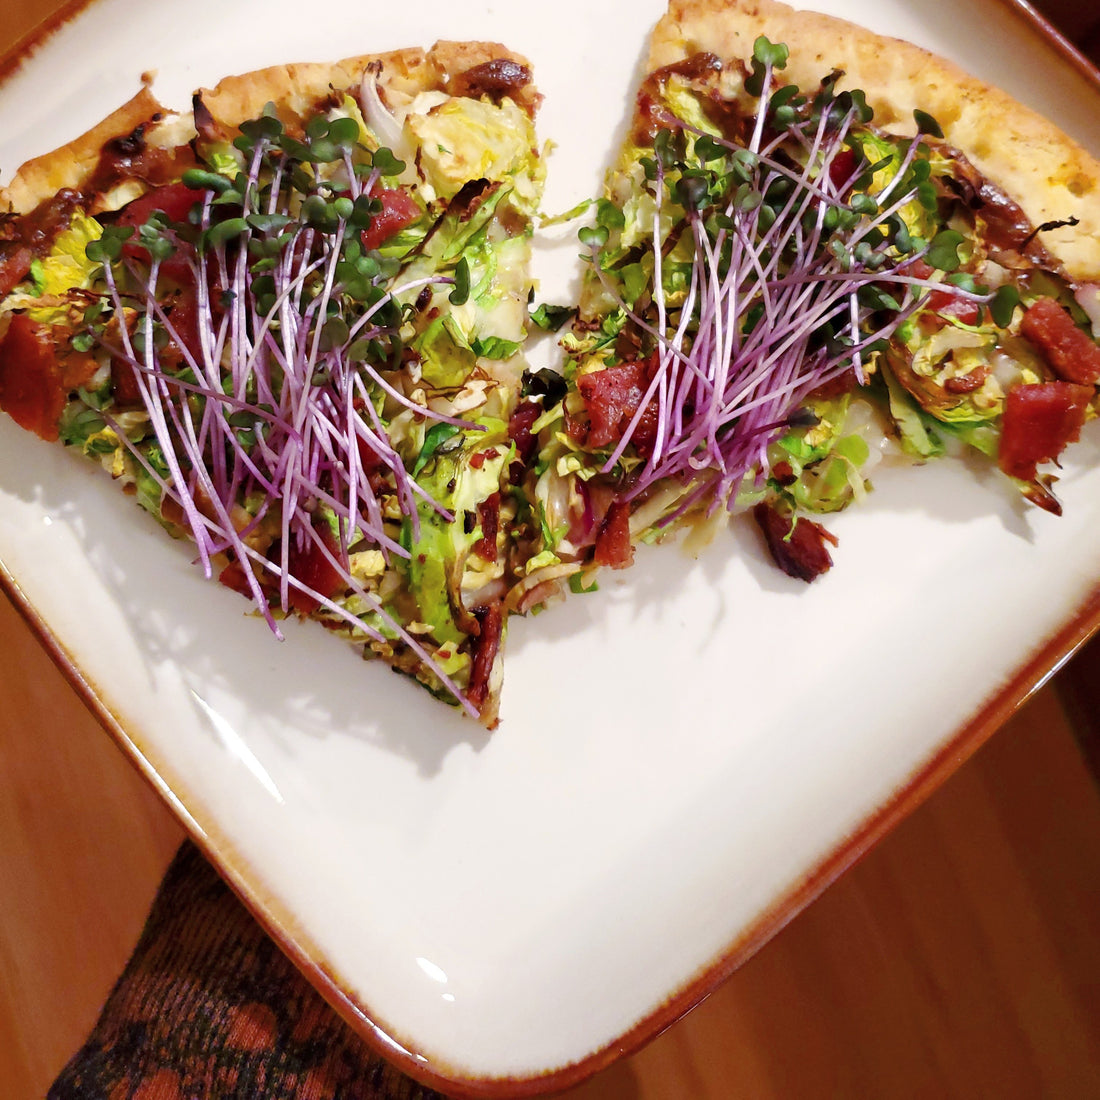 Shredded brussels sprout pizza with garlic, bacon and balsamic